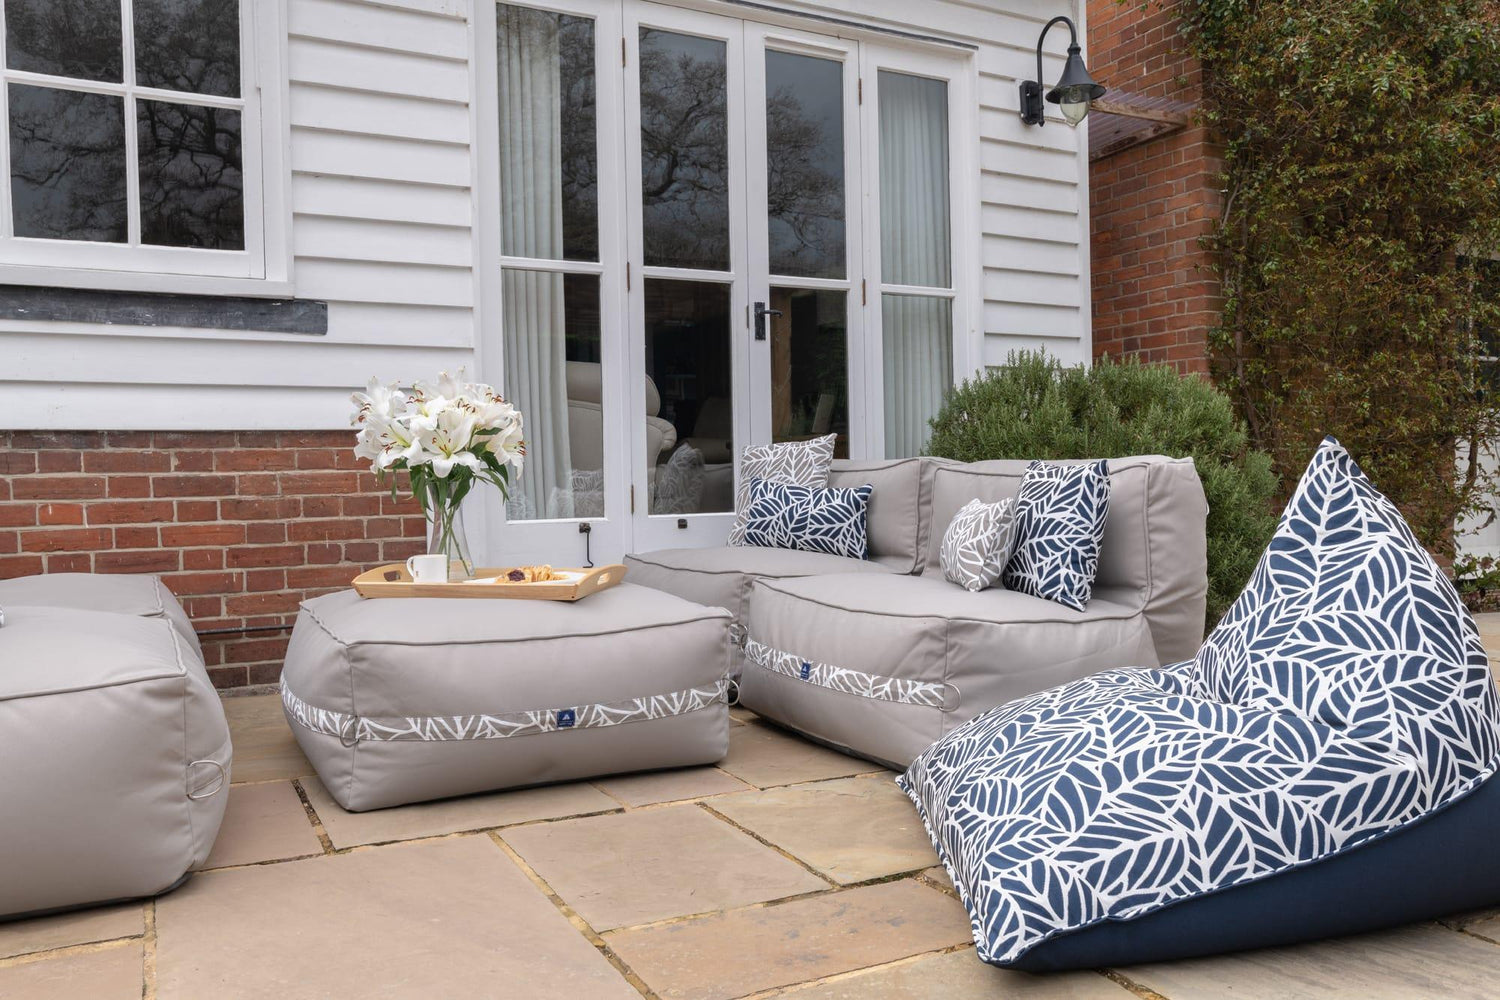 Is Your Garden Ready For Guests? Five Steps to a Party-Ready Patio - armadillosun